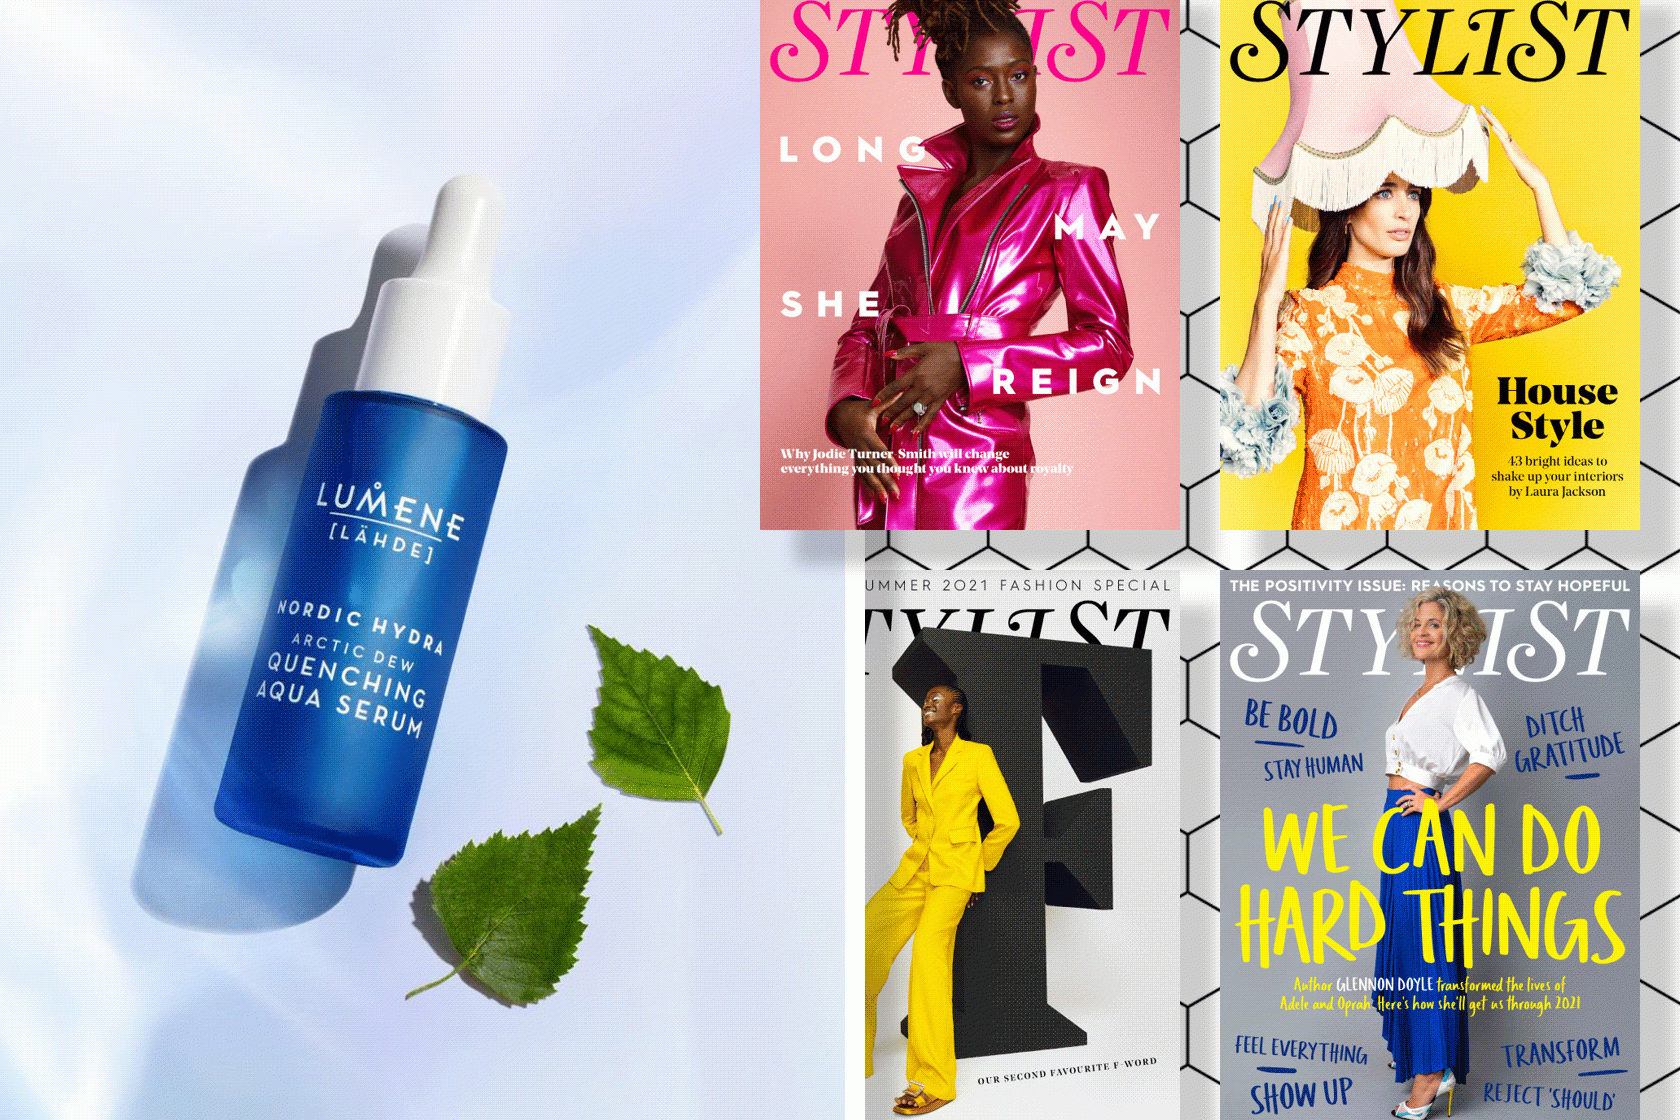 Stylist print subscription offer